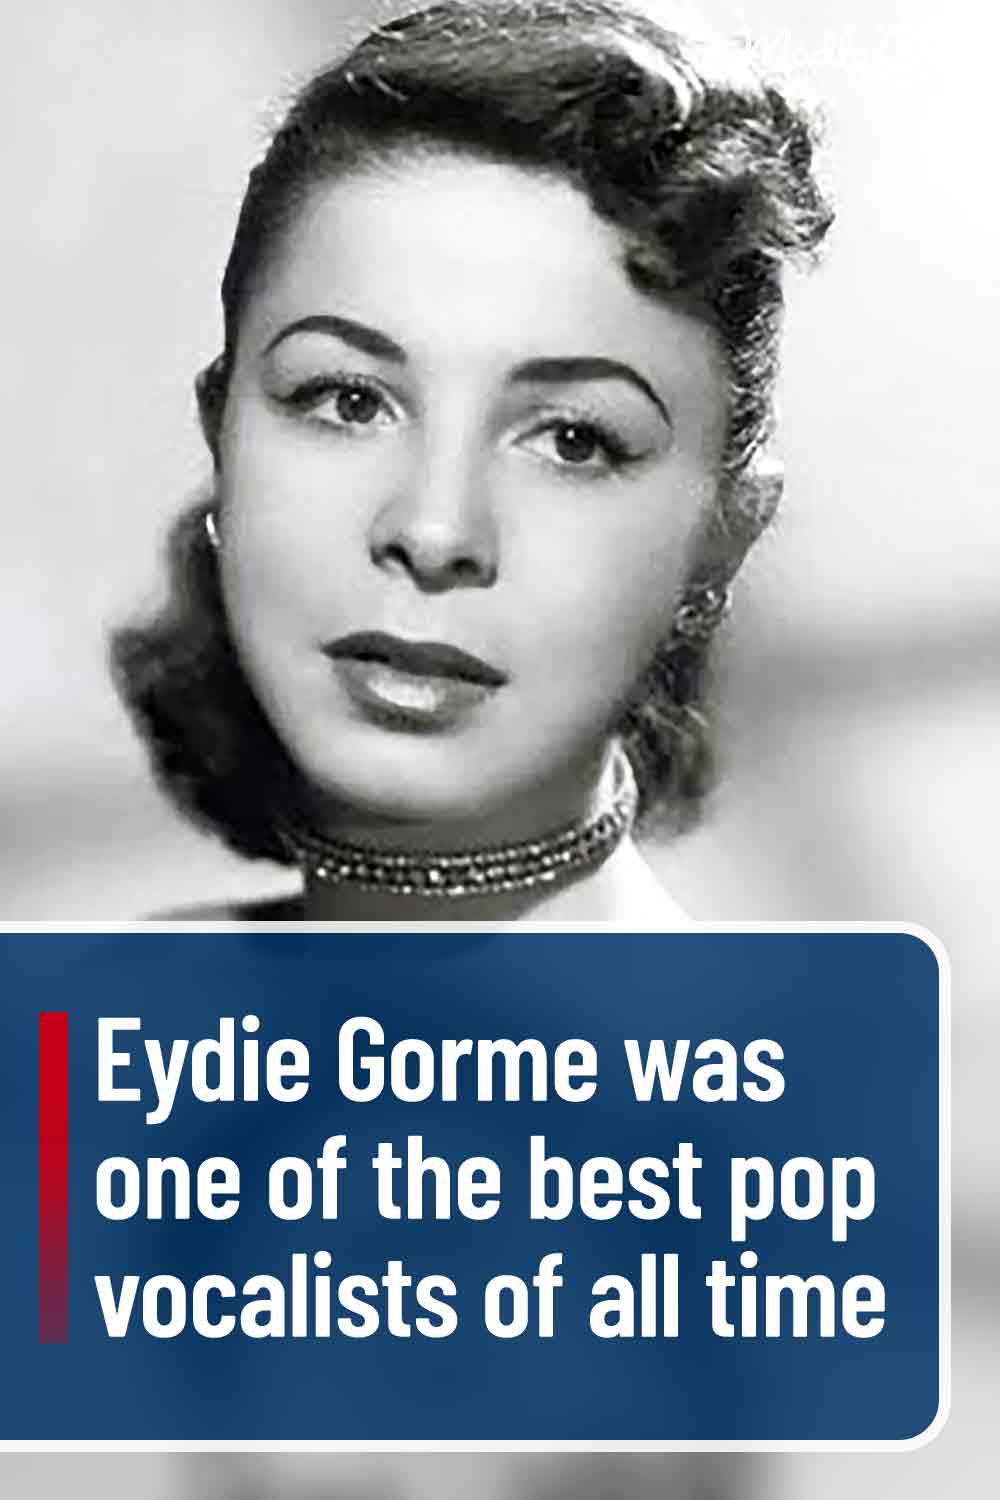 Eydie Gorme was one of the best pop vocalists of all time